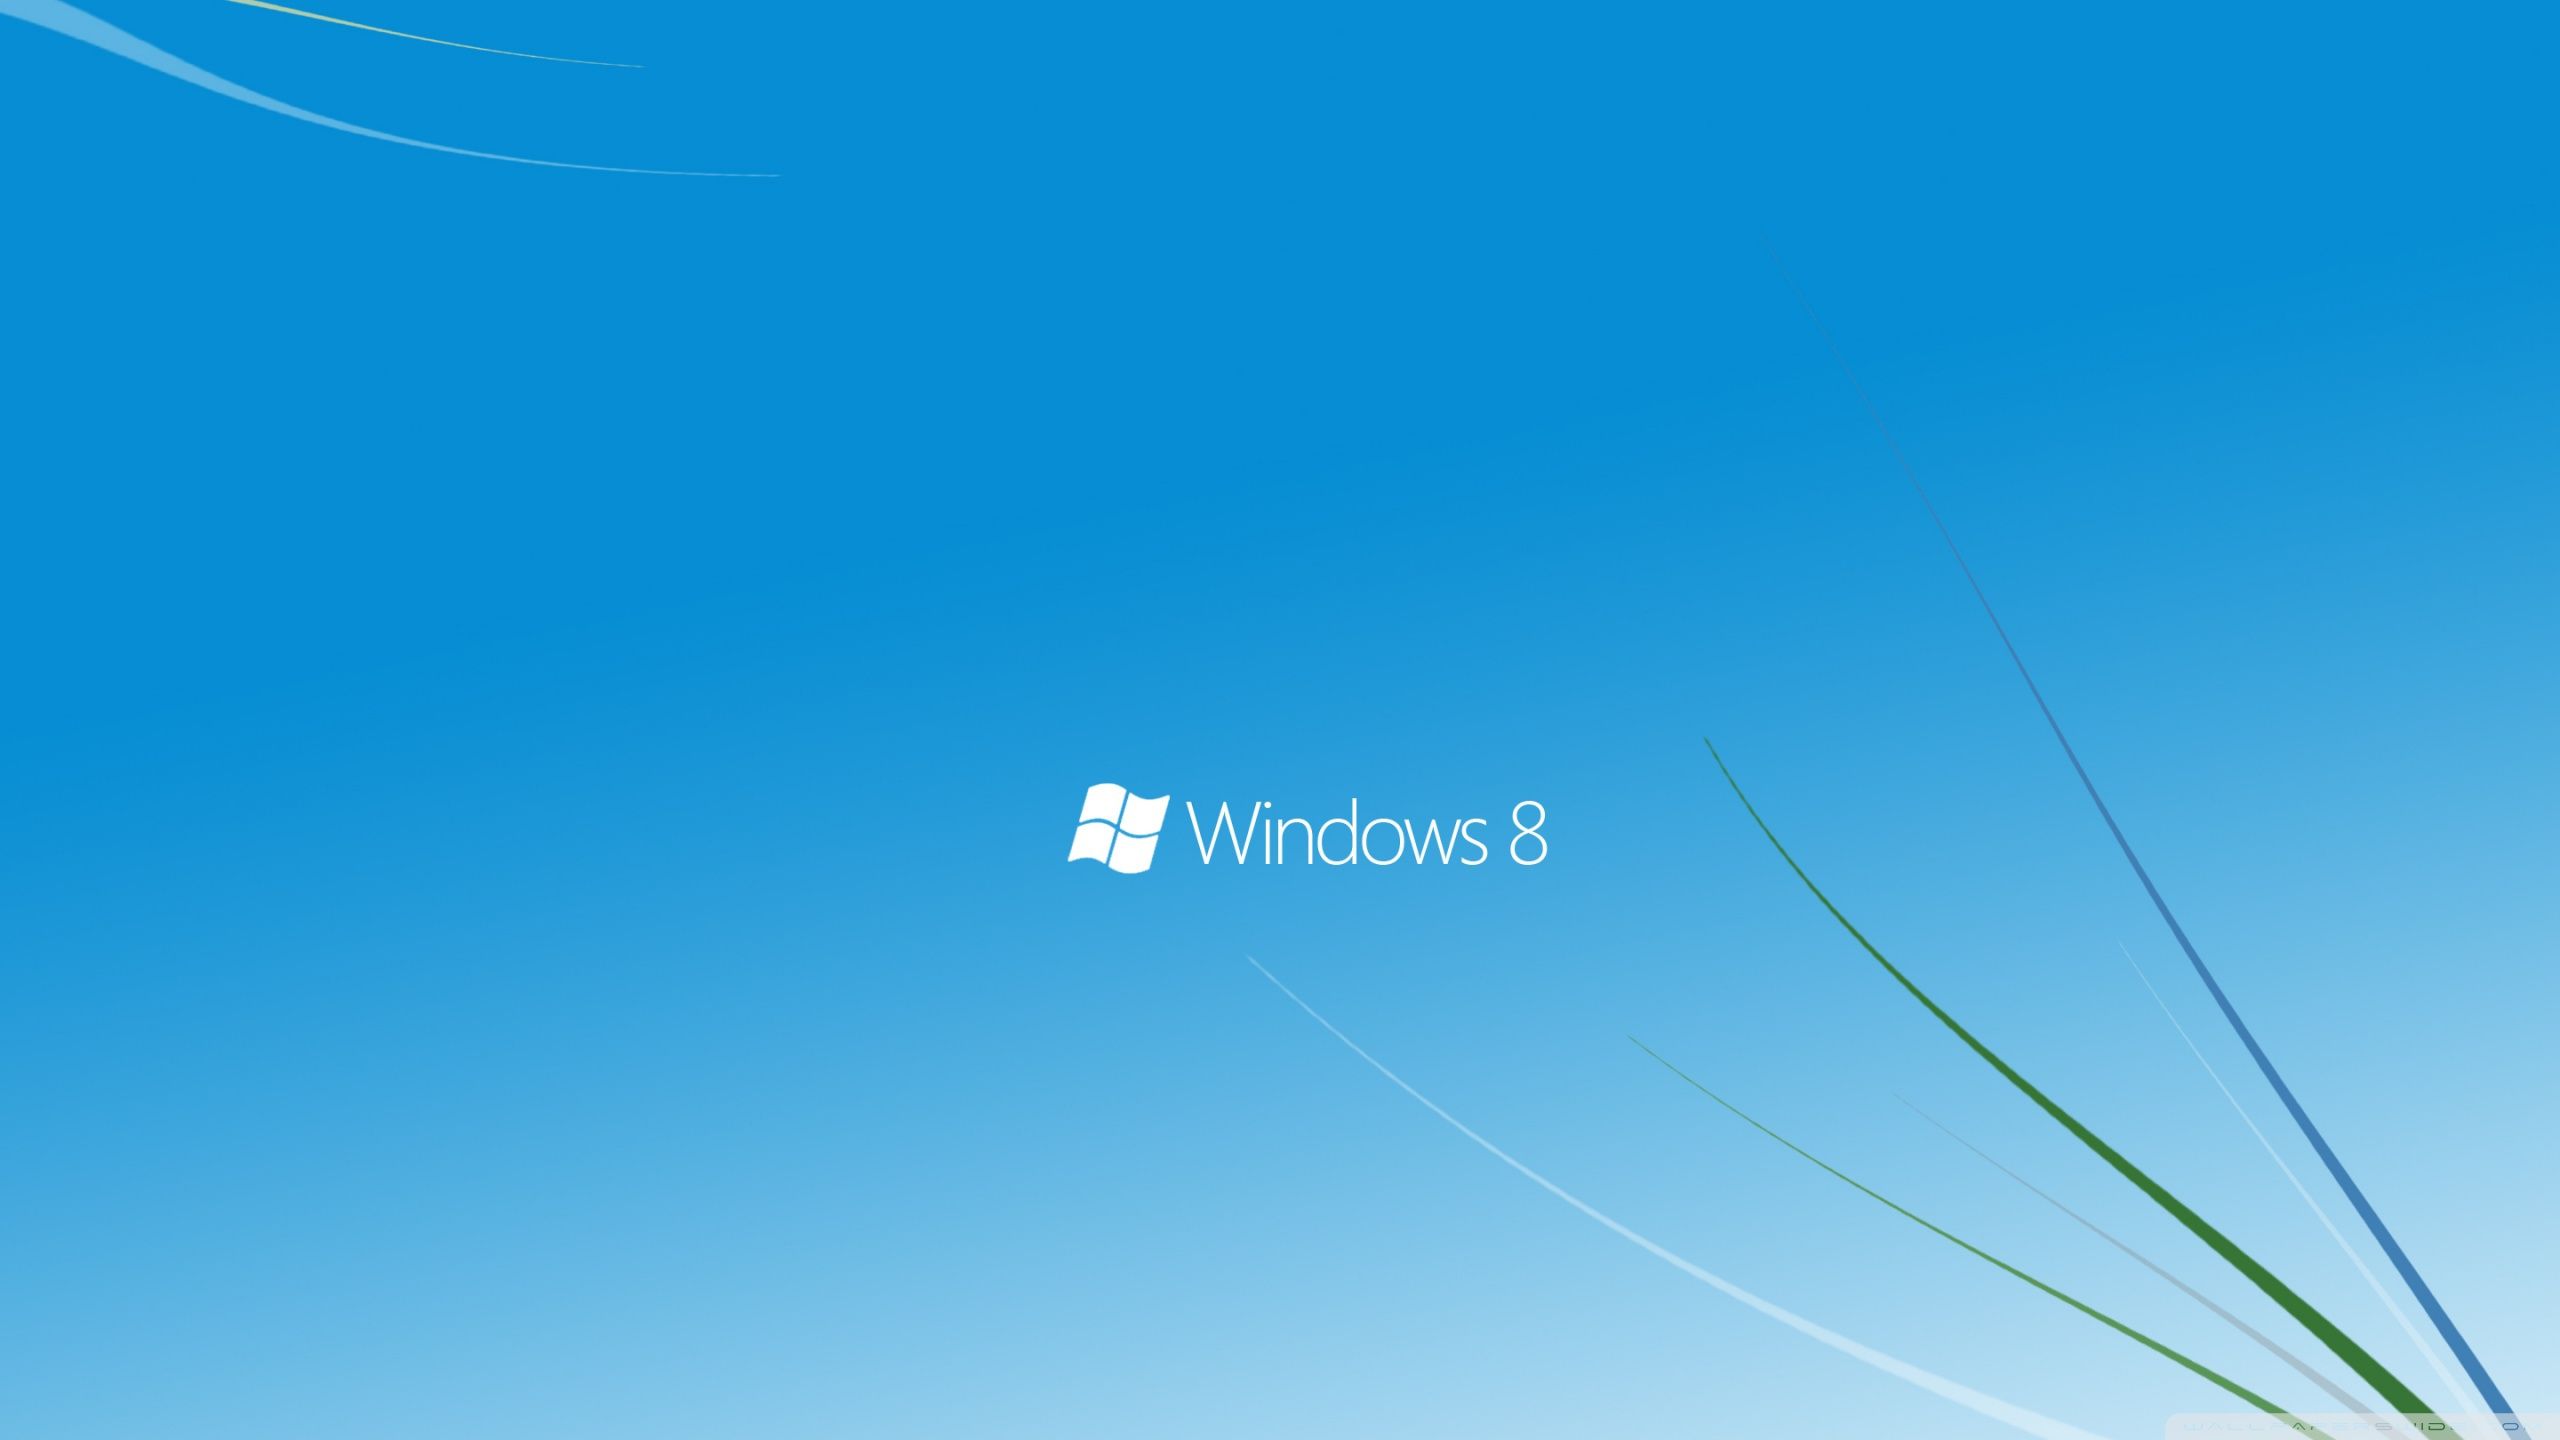 Windows 8 grass theme wallpapers and images - wallpapers, pictures